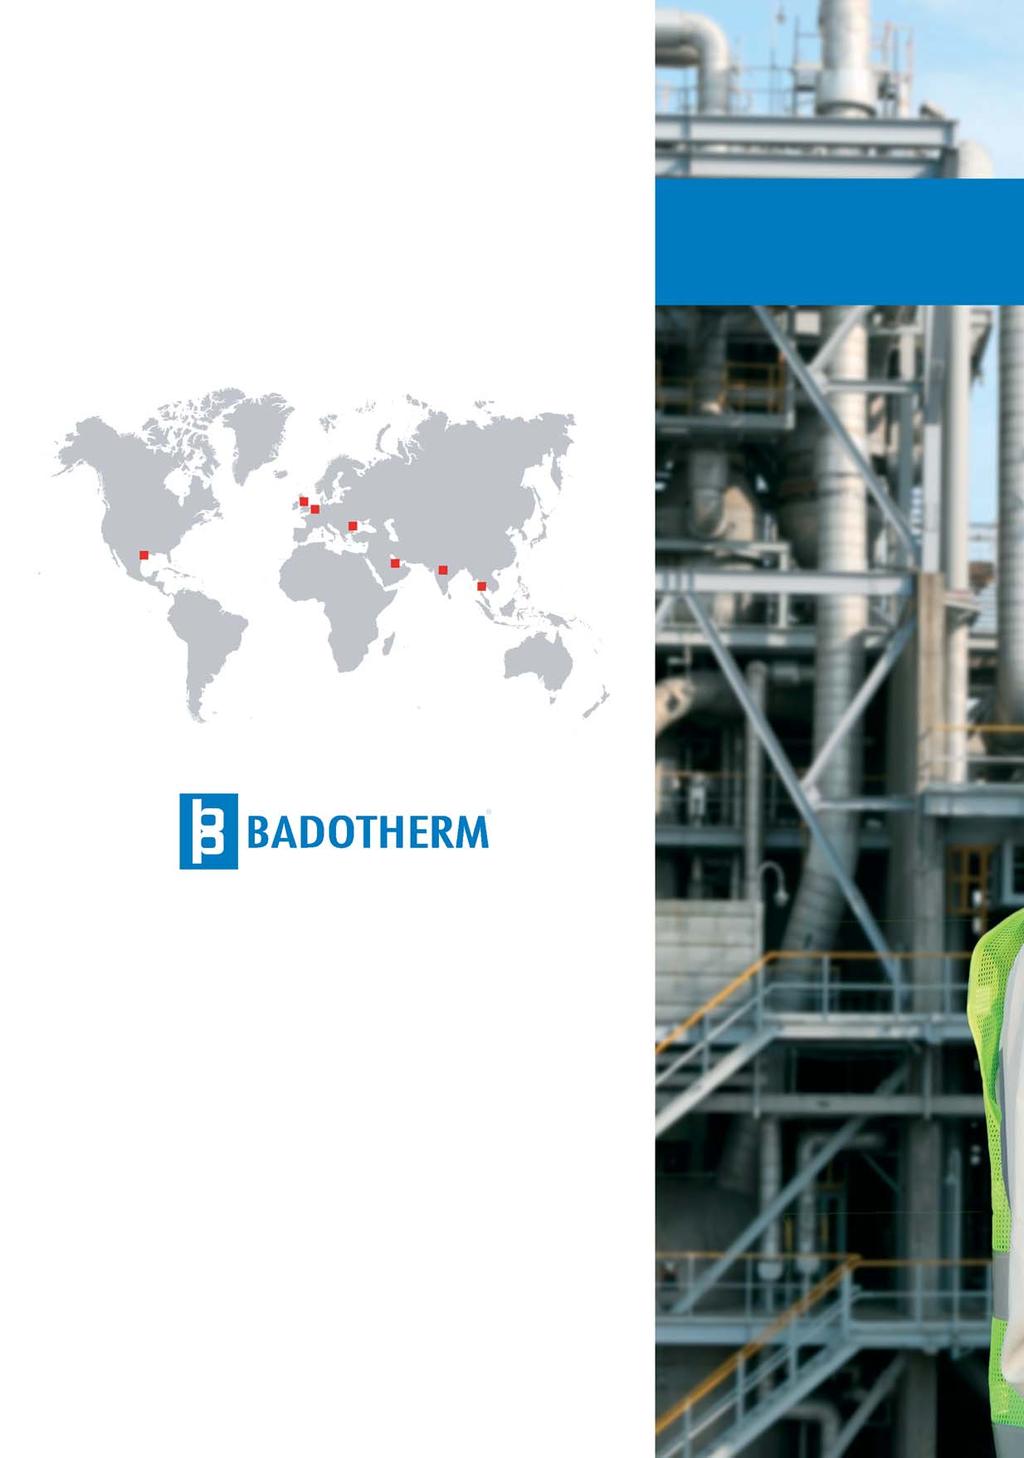 About Badotherm We are a European manufacturer of mechanical process instruments with a worldwide distribution network.